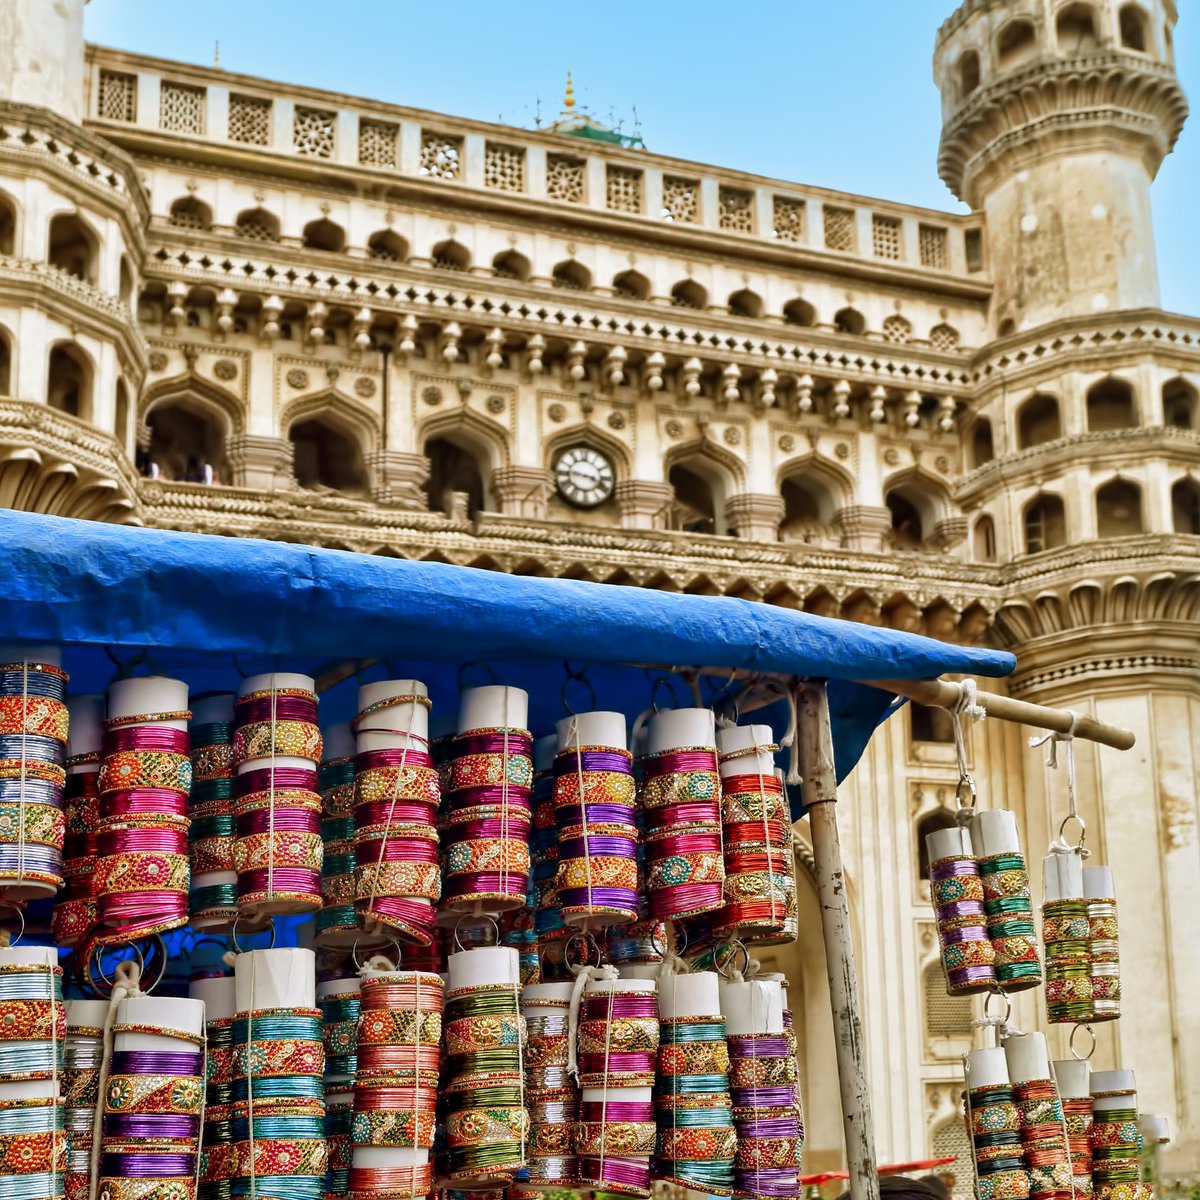 No one can simply ignore the diverse collection of Hyderabadi chudees

#TelanganaTourism #Bazaars #HeartOfDeccan